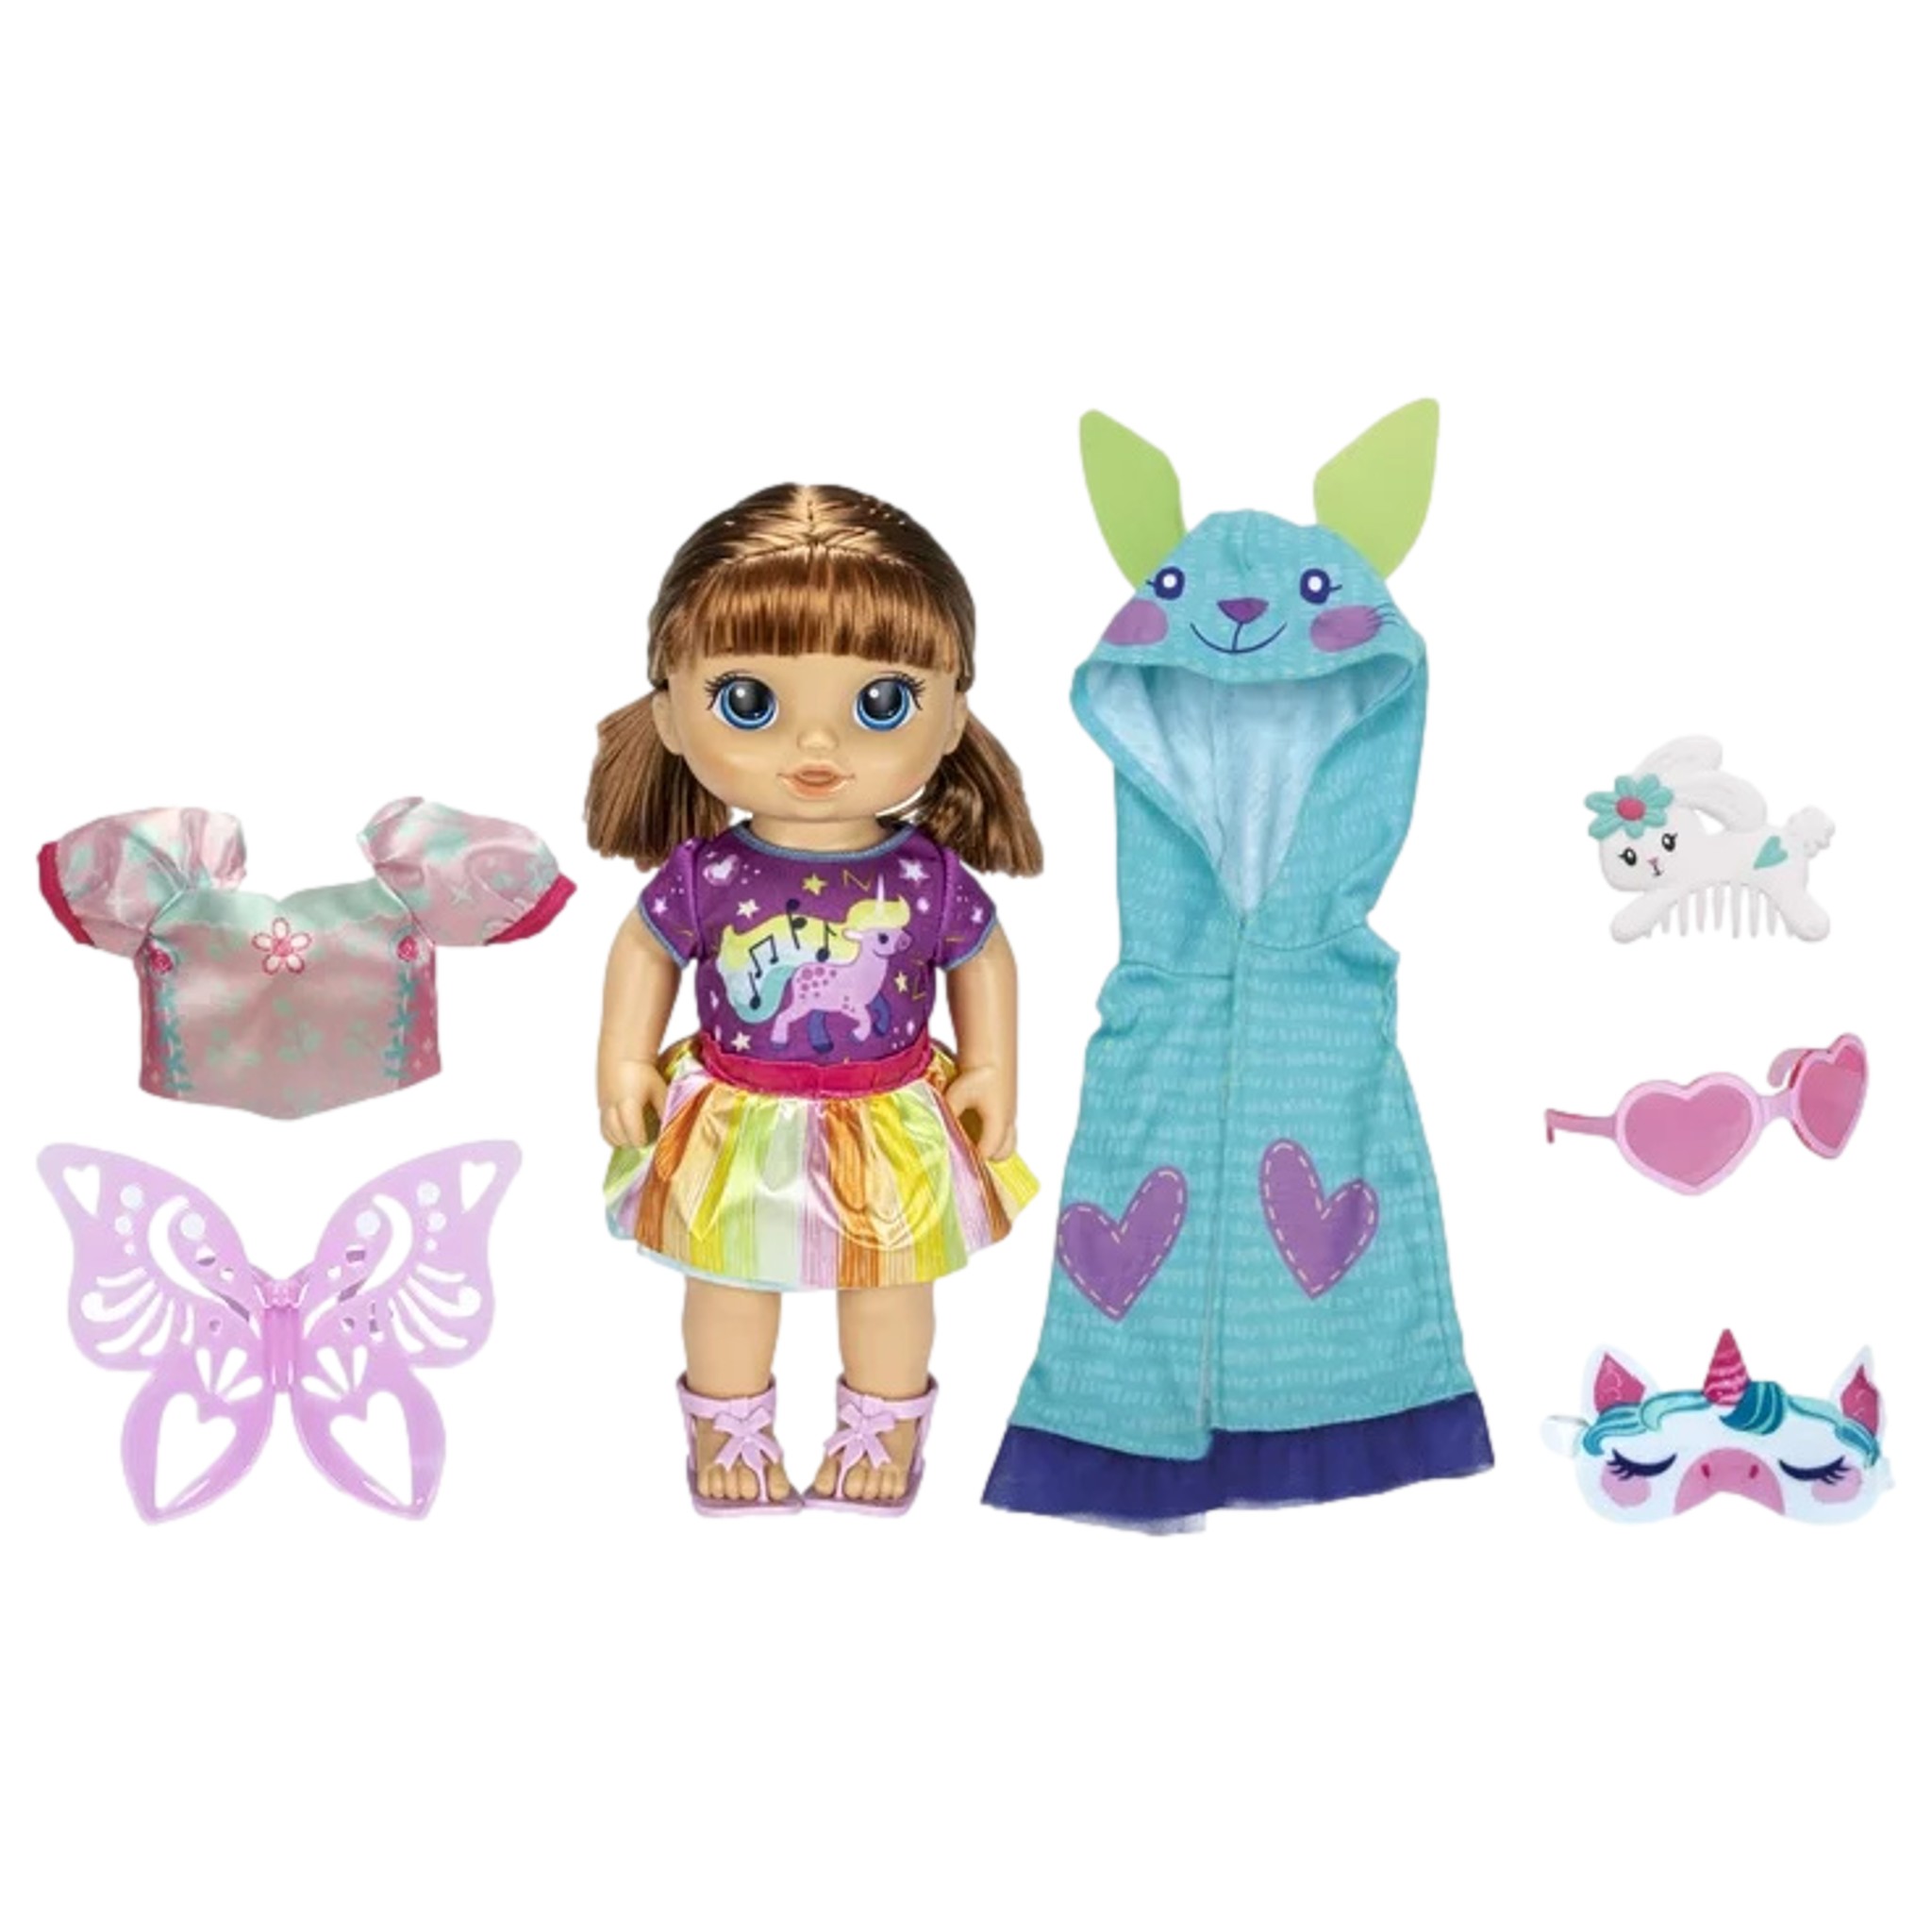 Baby Alive Magical Styles Baby Doll, Brown Hair, 9 Dress-Up Accessories